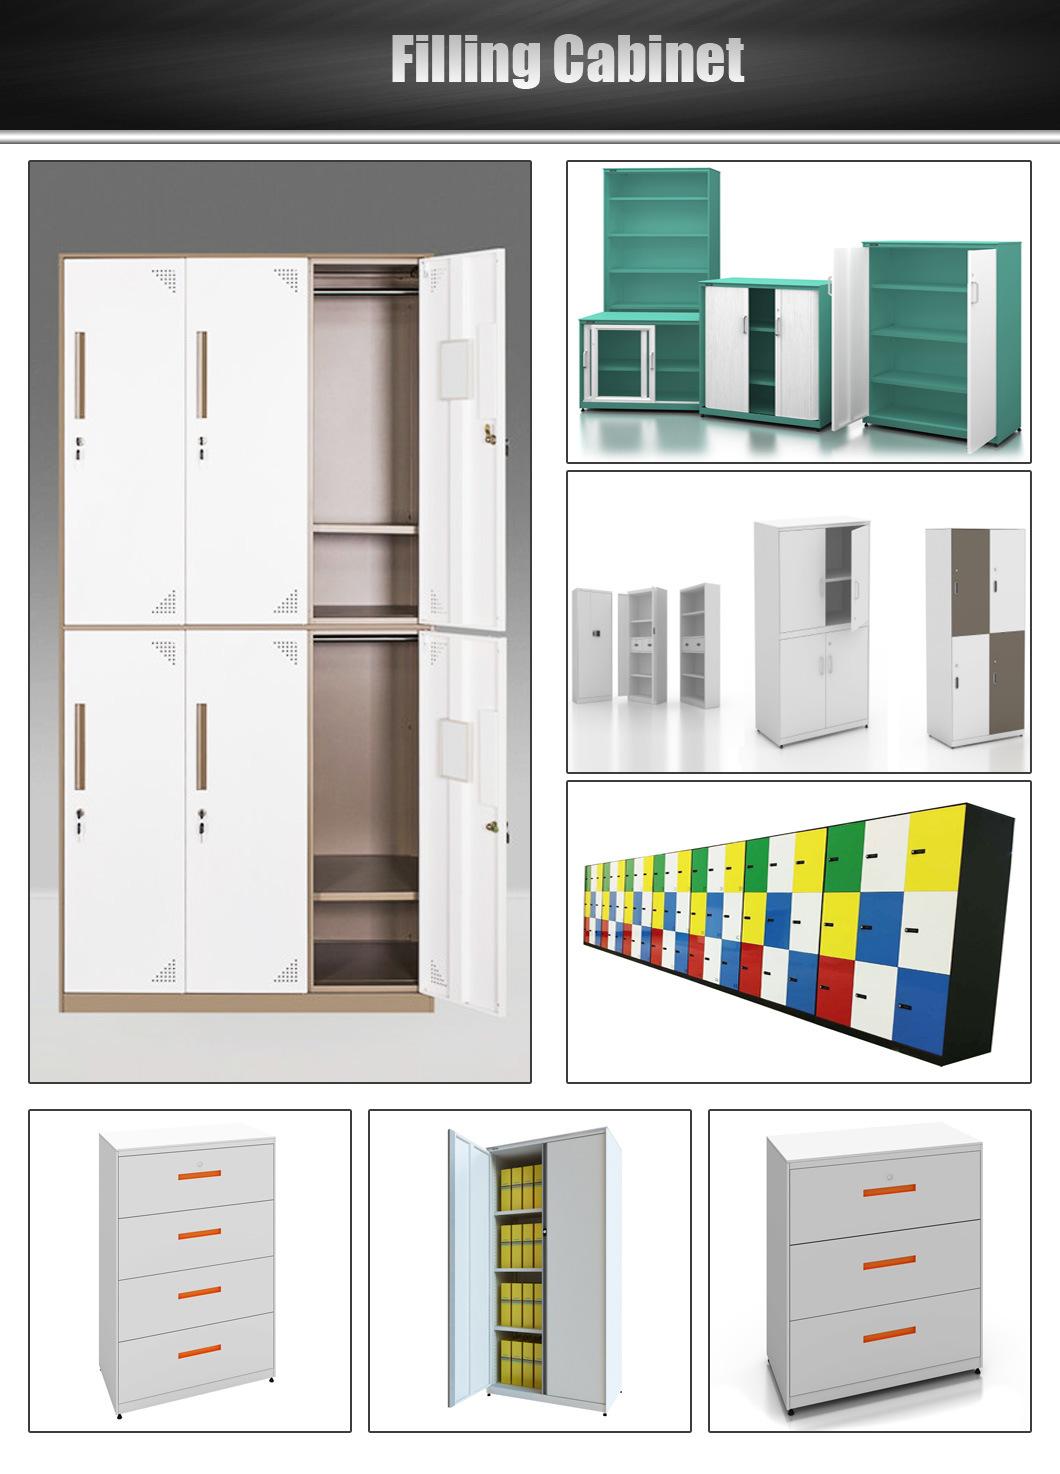 Street Price Work Storage Cabinets with Environmentally-Friendly Materials